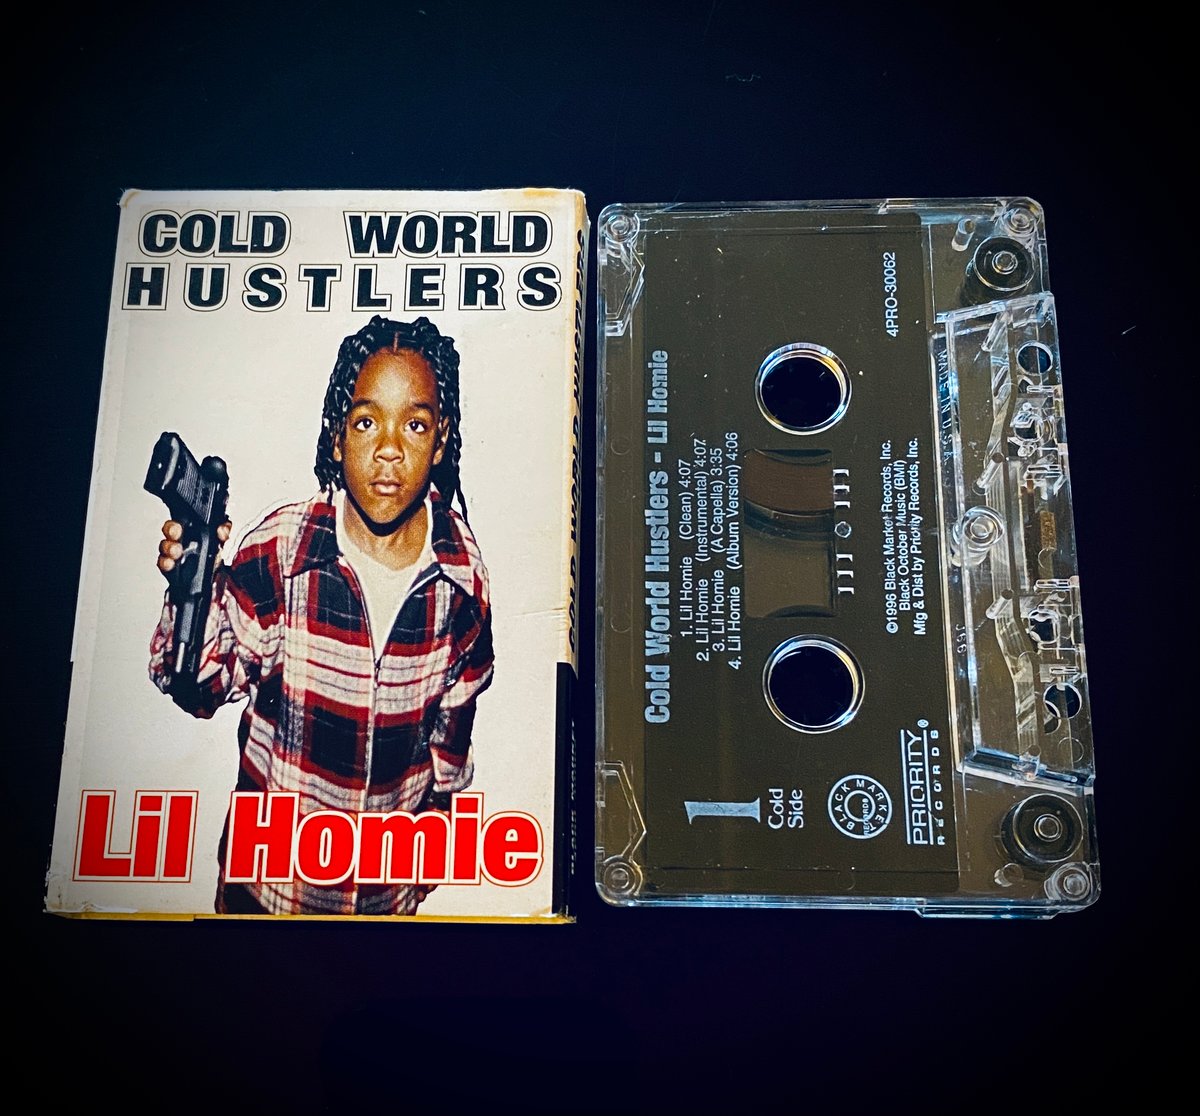 Cold World Hustlers “ Lil Homie” maxi | Throwdown Records